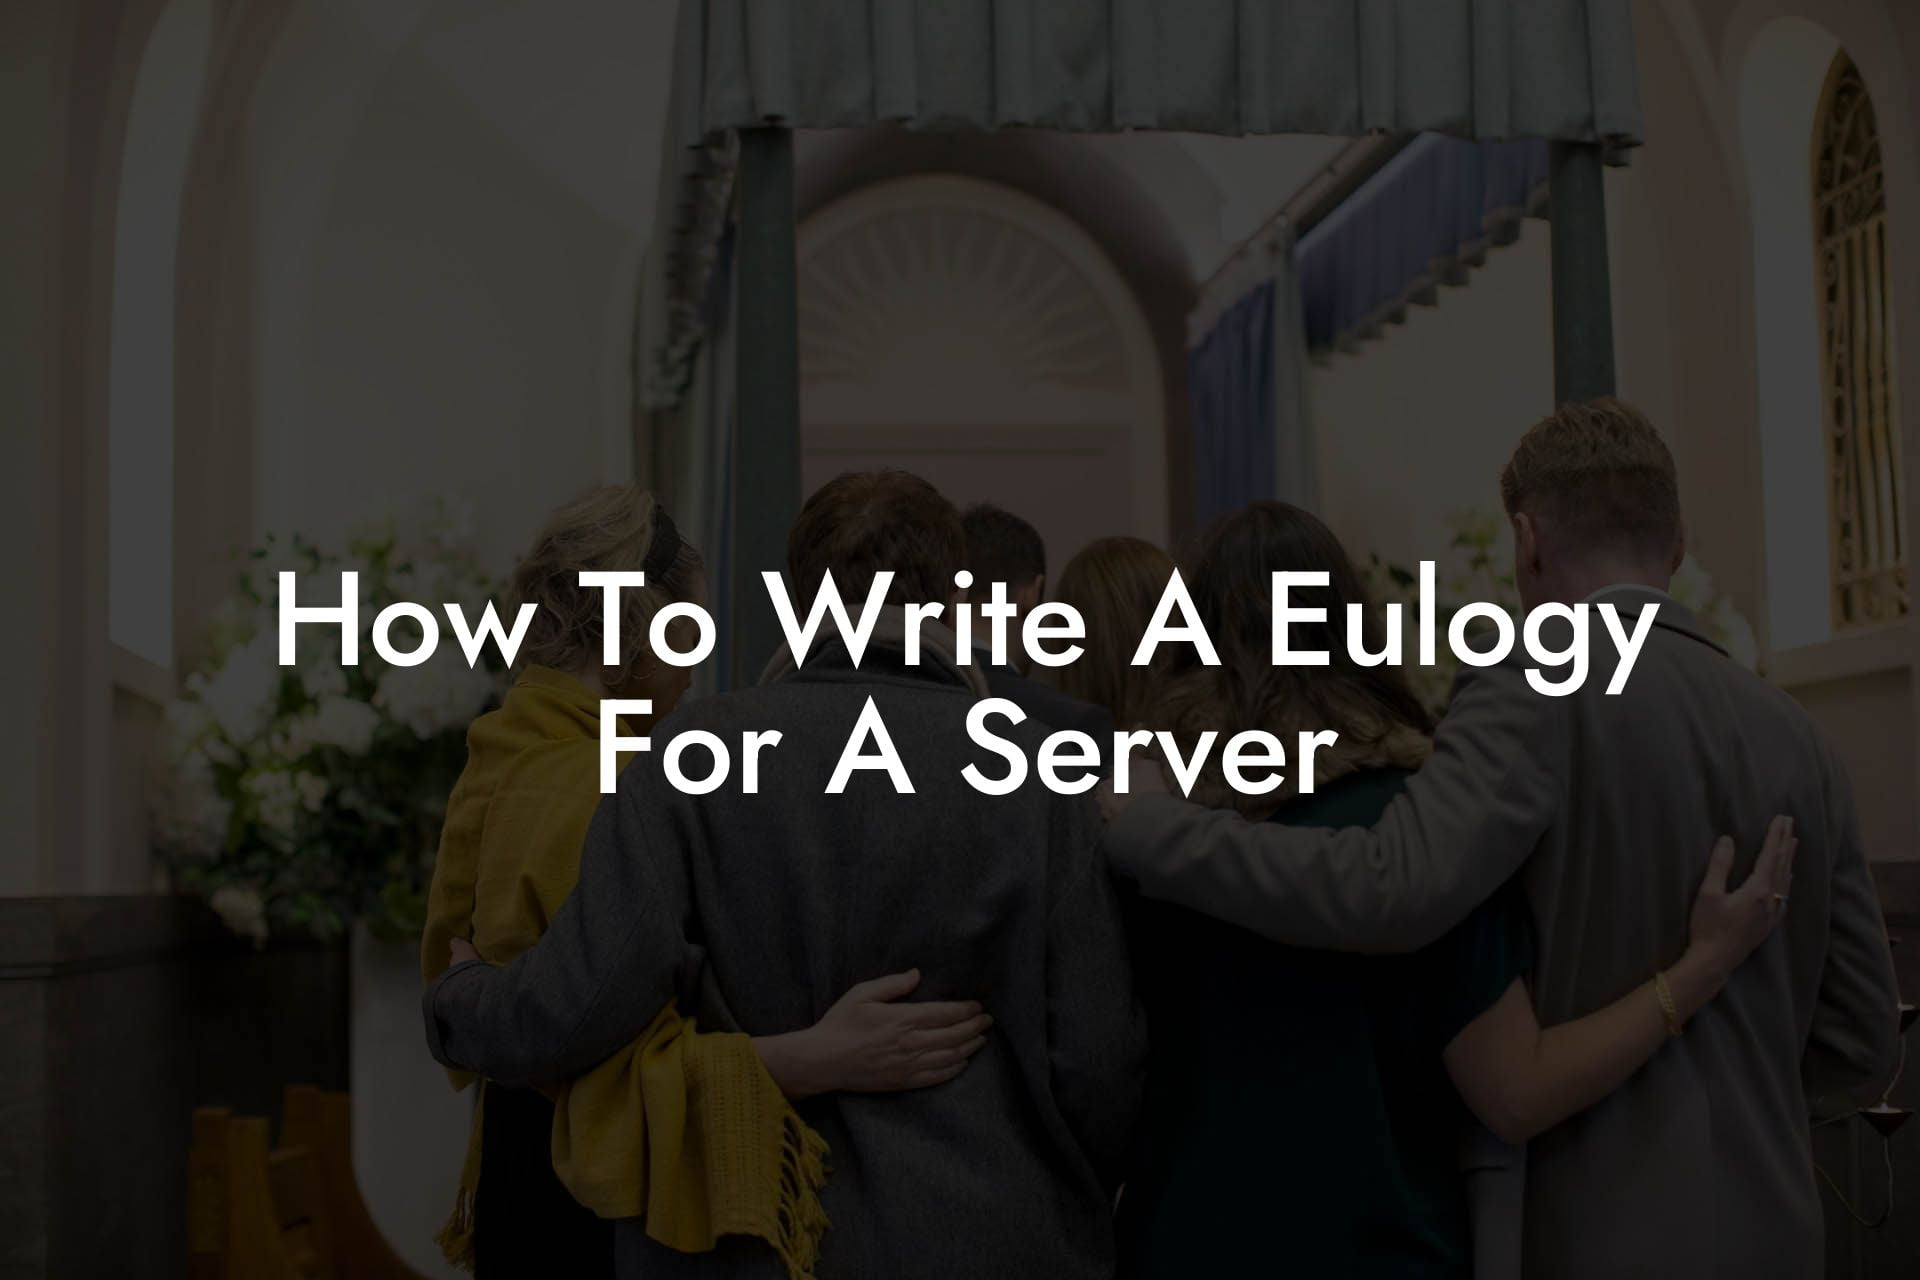 How To Write A Eulogy For A Server